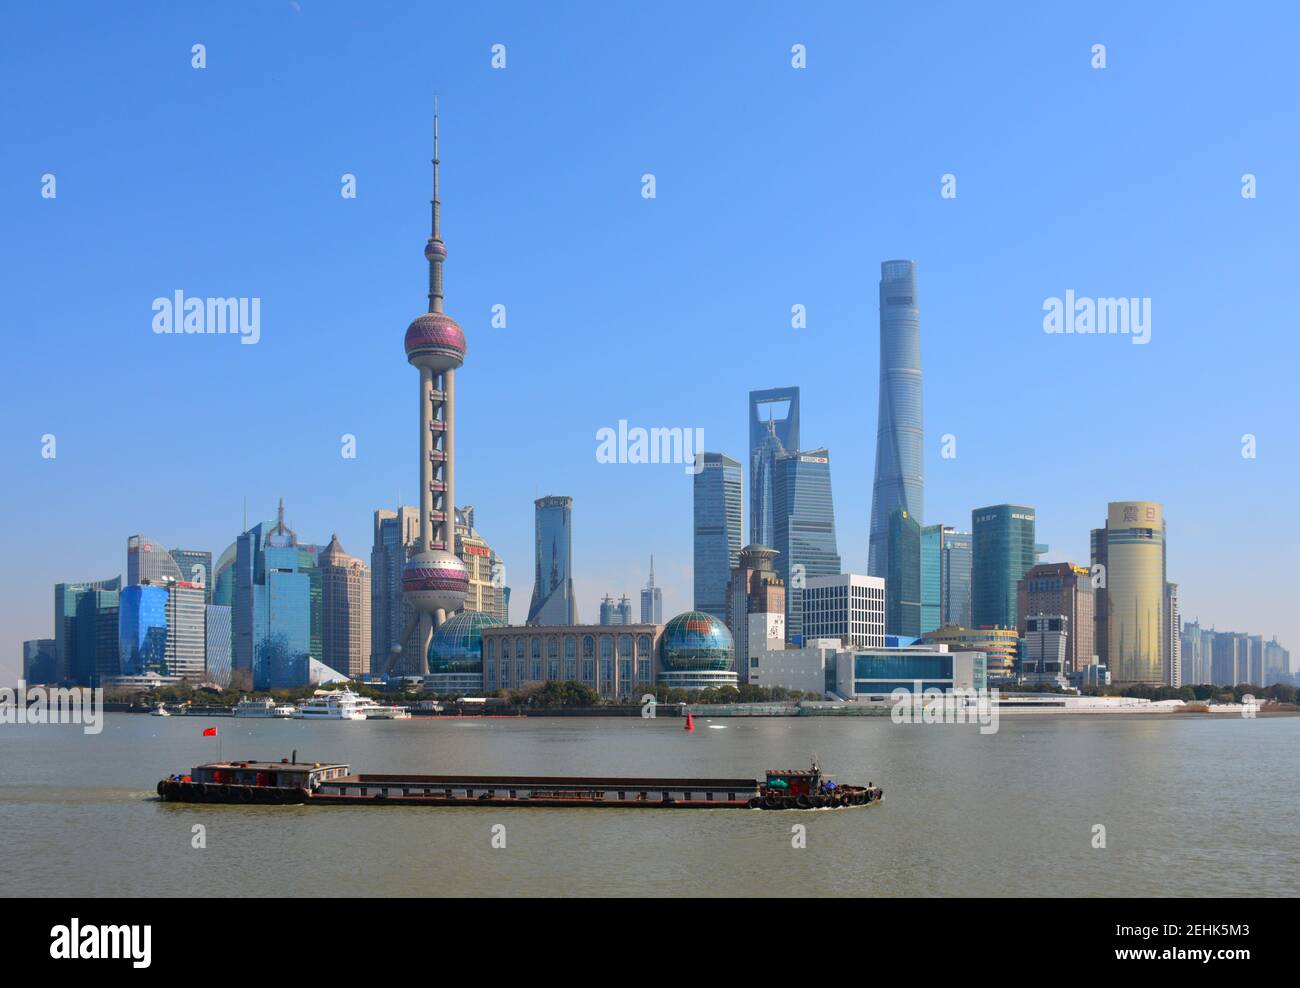 Barge transports goods along the Huangpu river, part of the Beijing to Hangzhou grand canal. Pudong skyline in the background. Feb 2021 Stock Photo